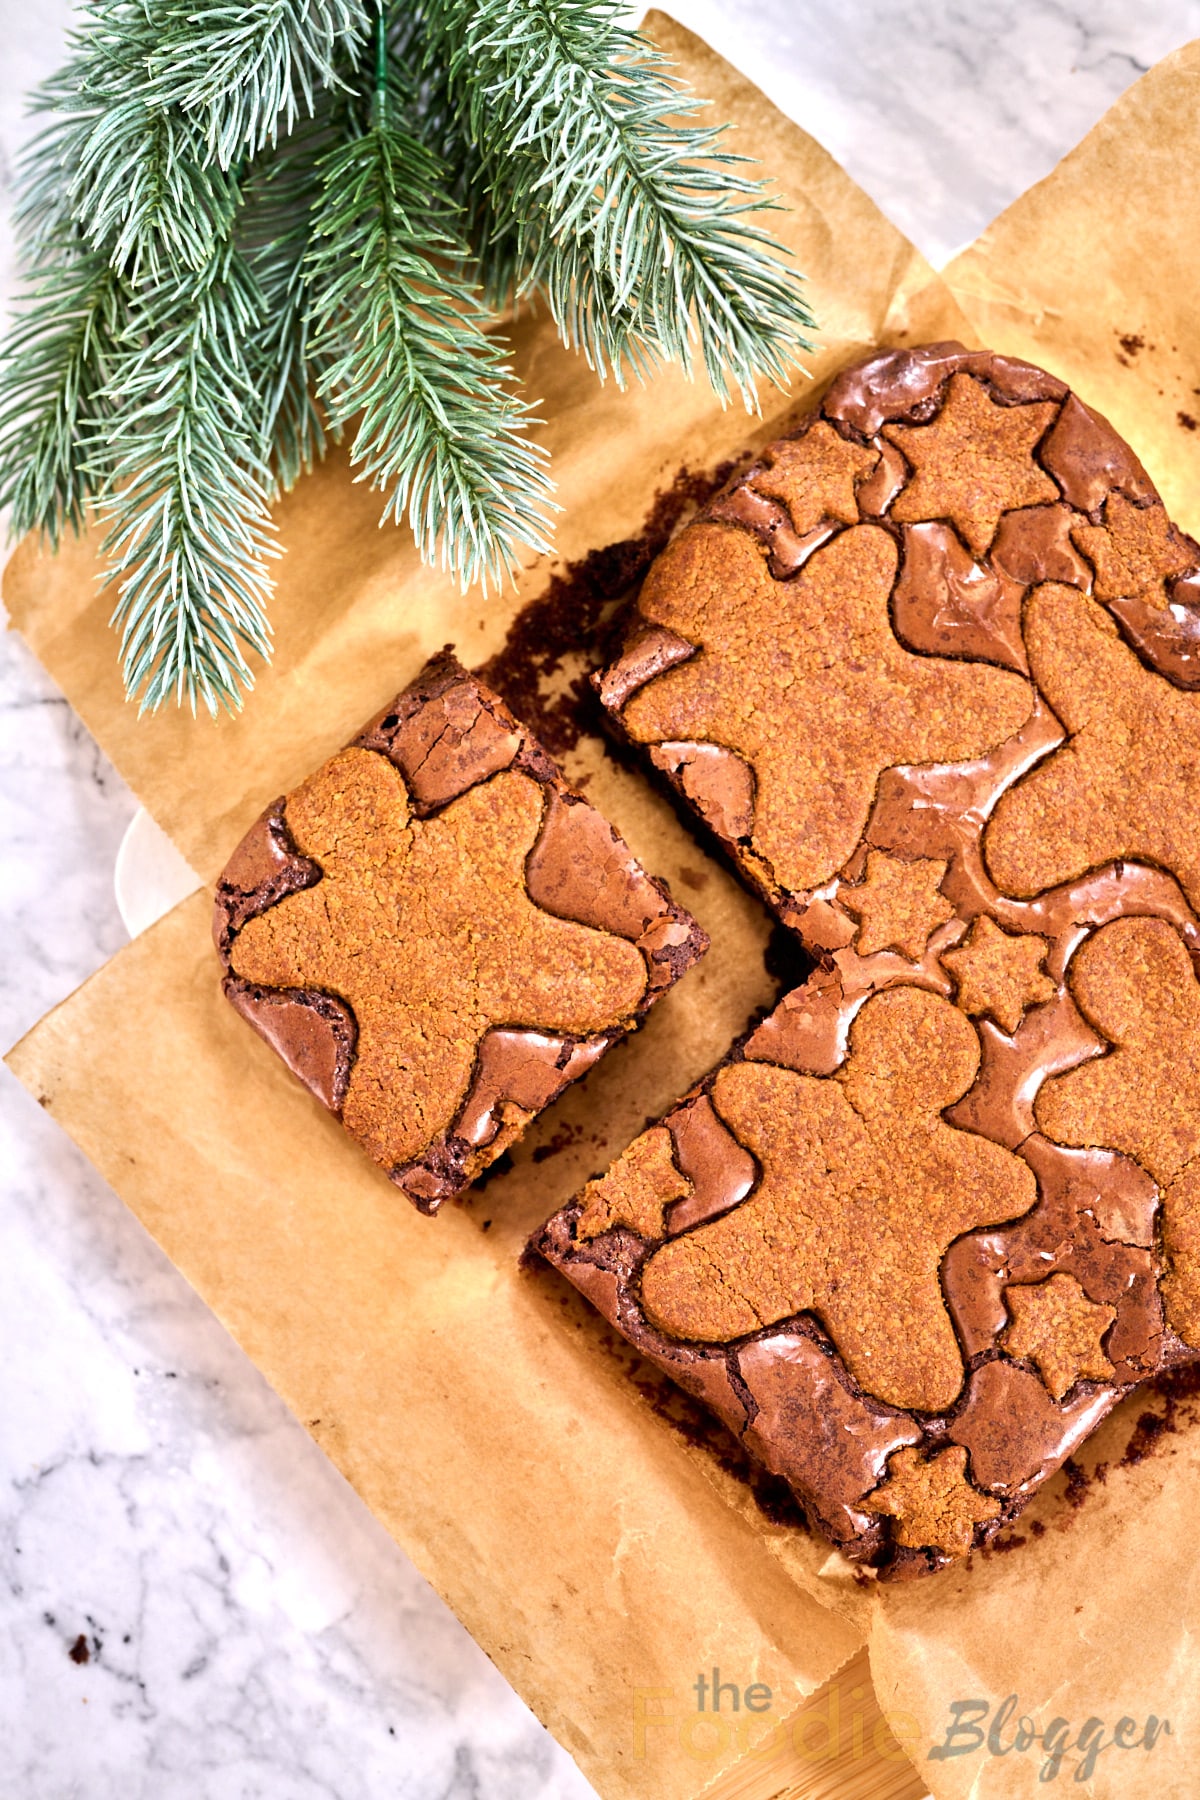 gingerbread brownies view from top